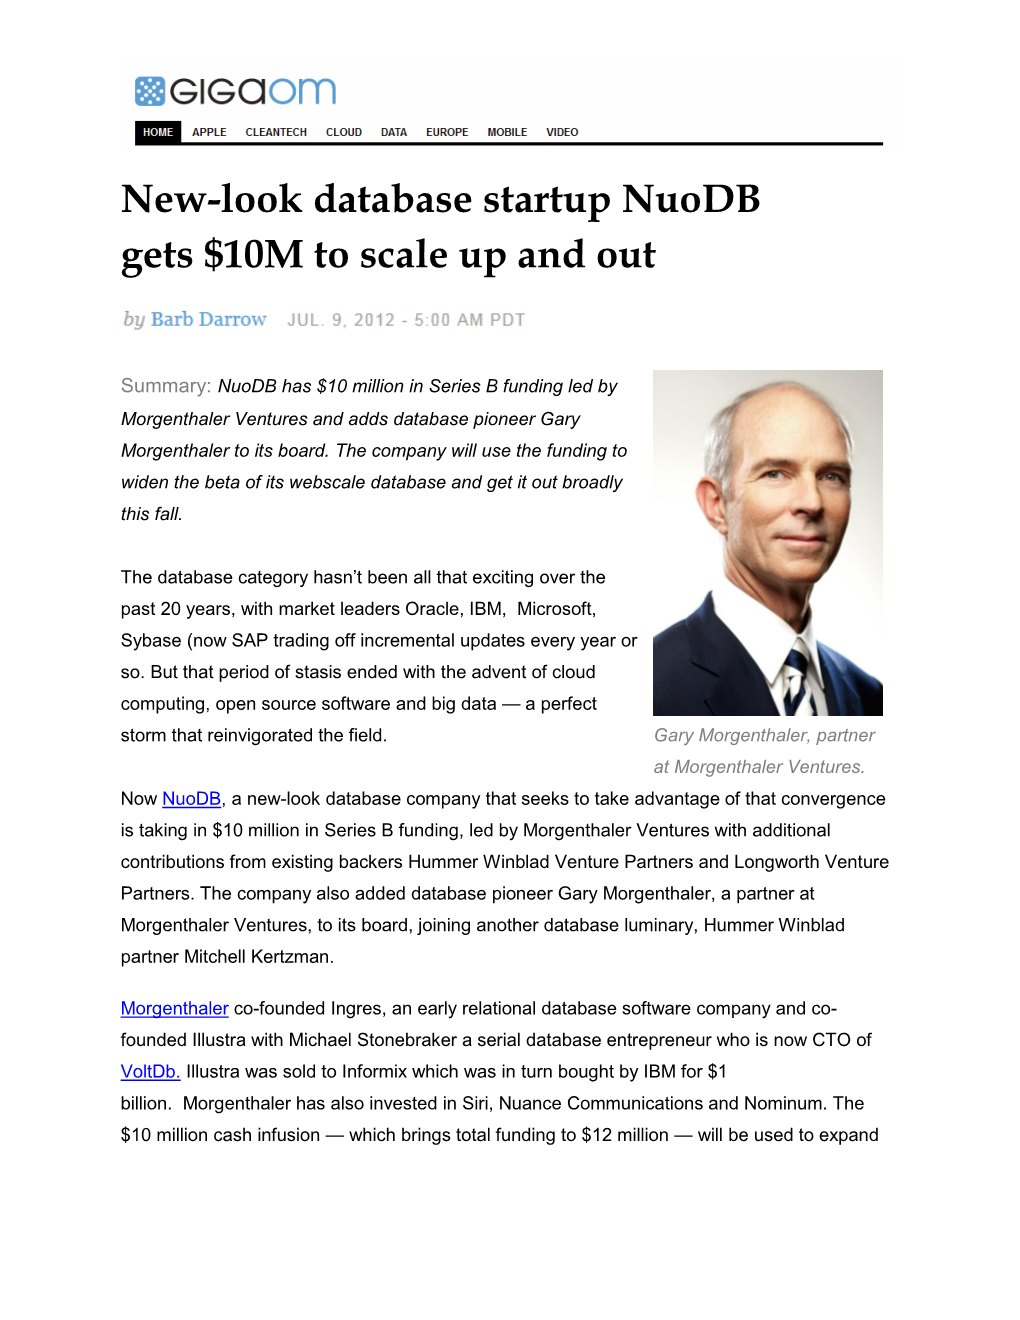 New-Look Database Startup Nuodb Gets $10M to Scale up and Out